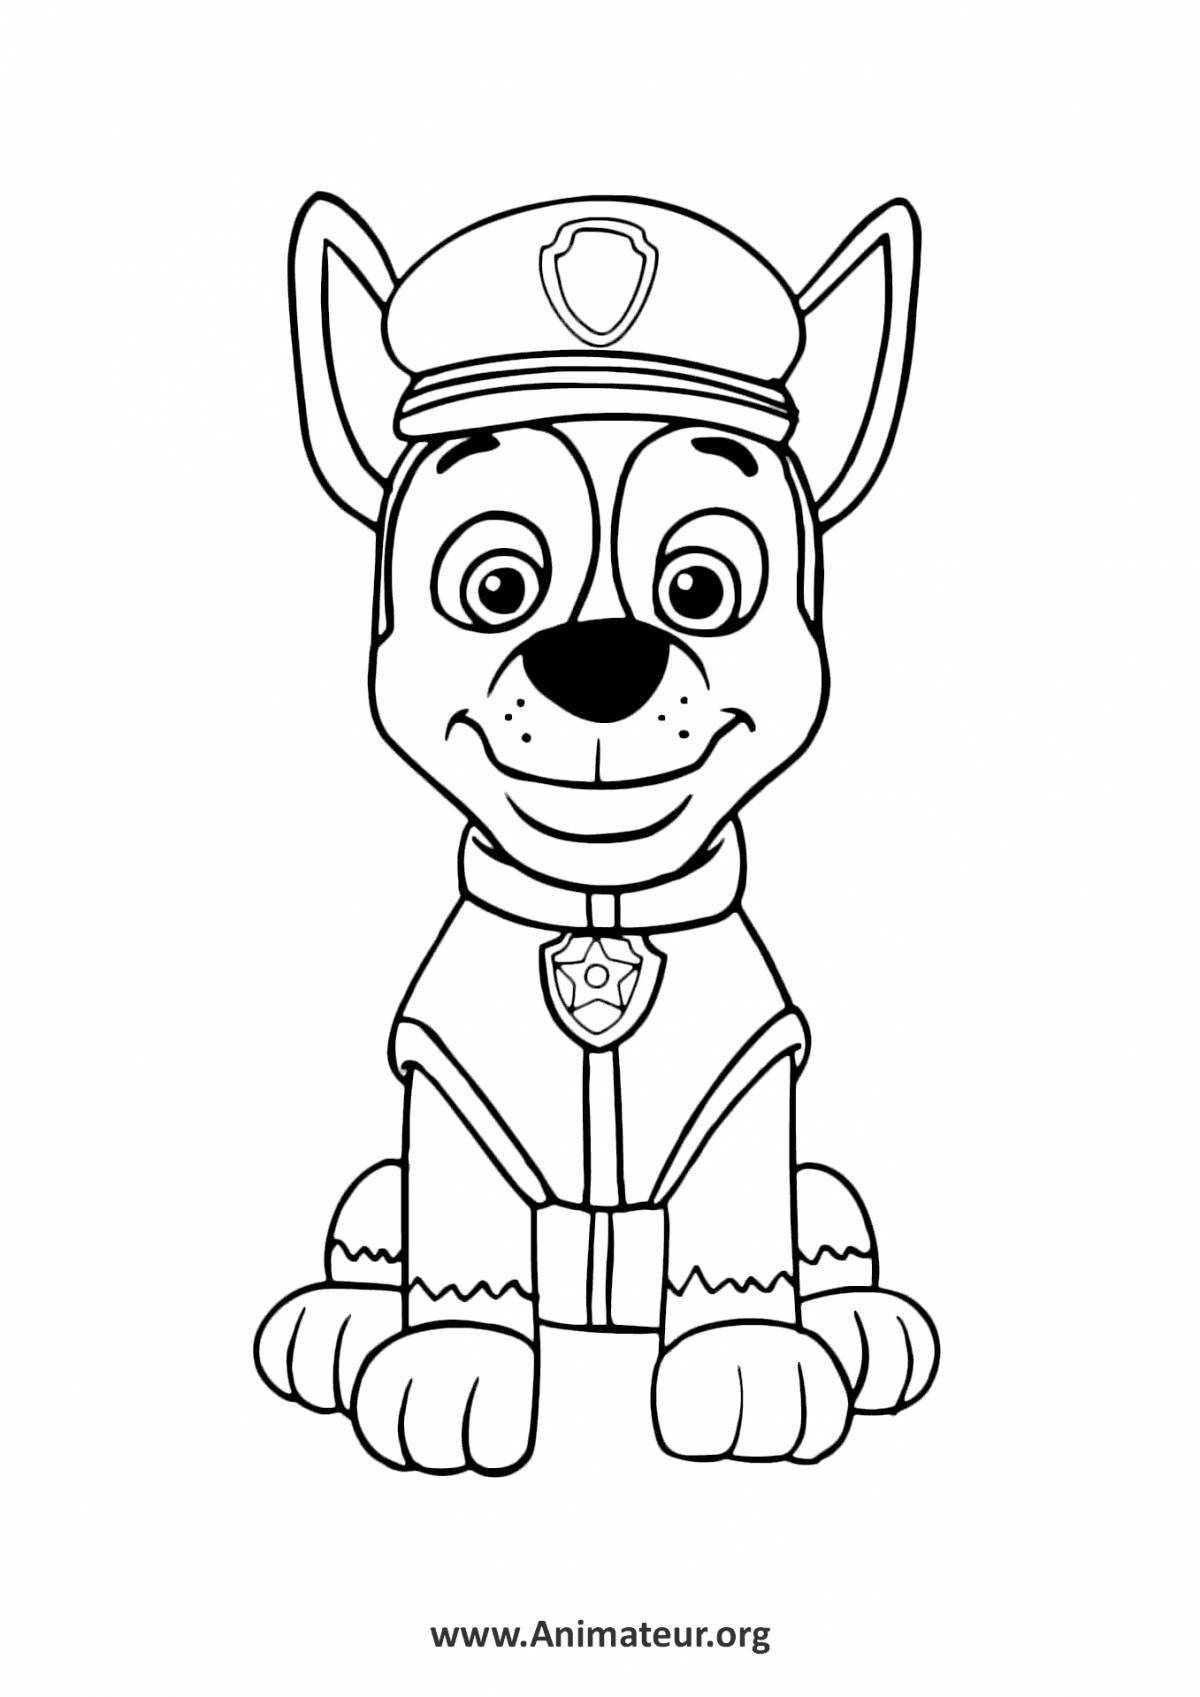 Adorable racer coloring book for kids